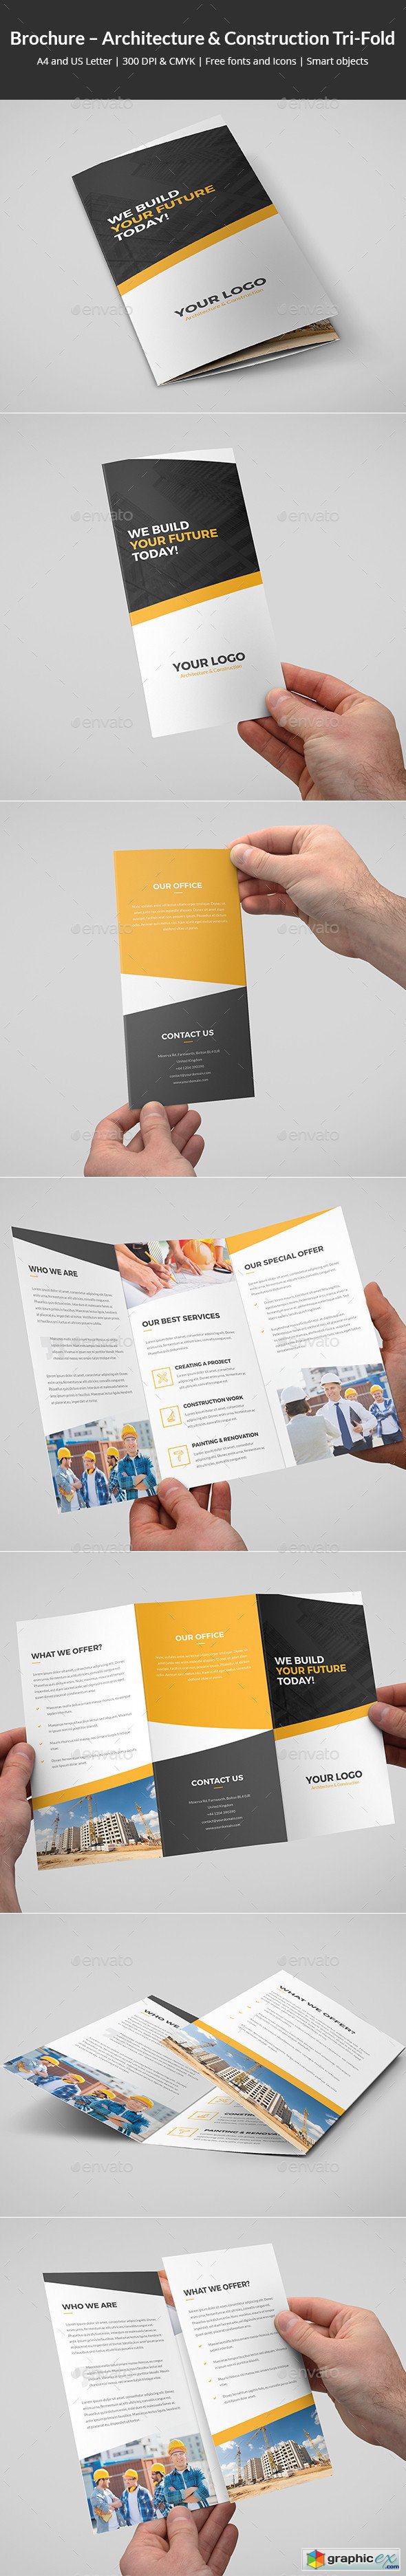 Brochure  Architecture and Construction Tri-Fold